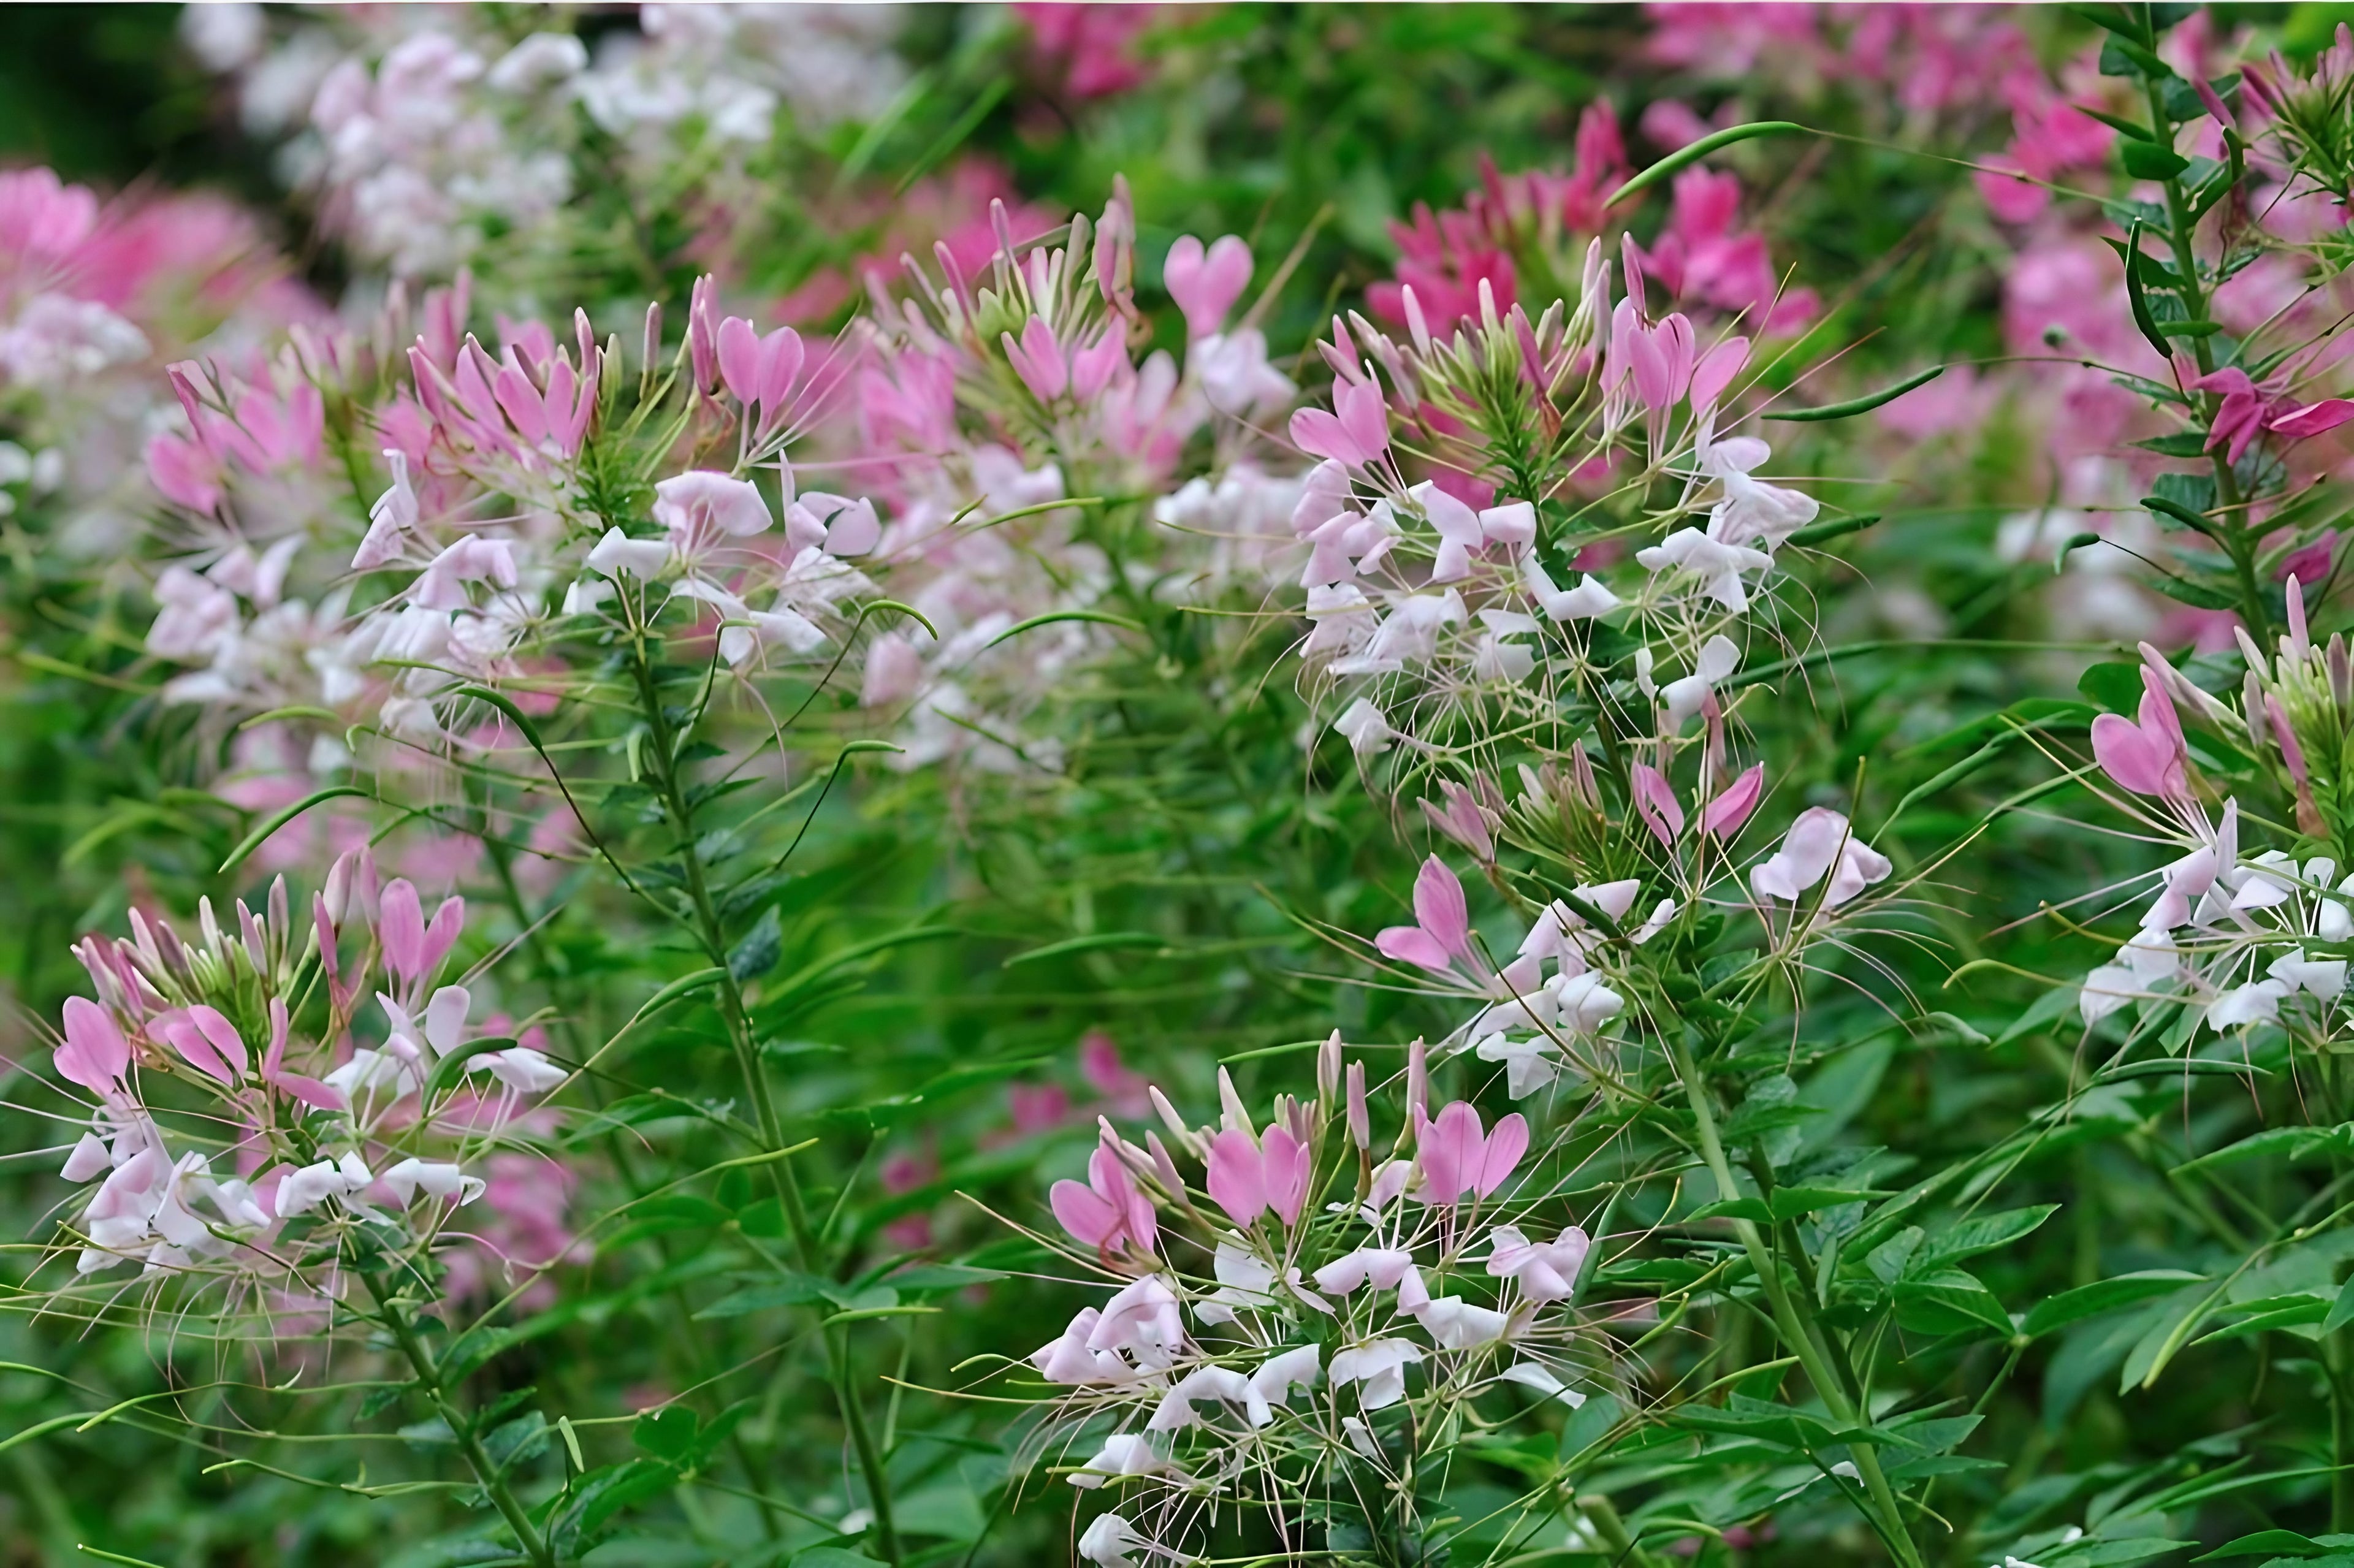 A vibrant cluster of Cleome Pink Queen flowers blooming in a garden